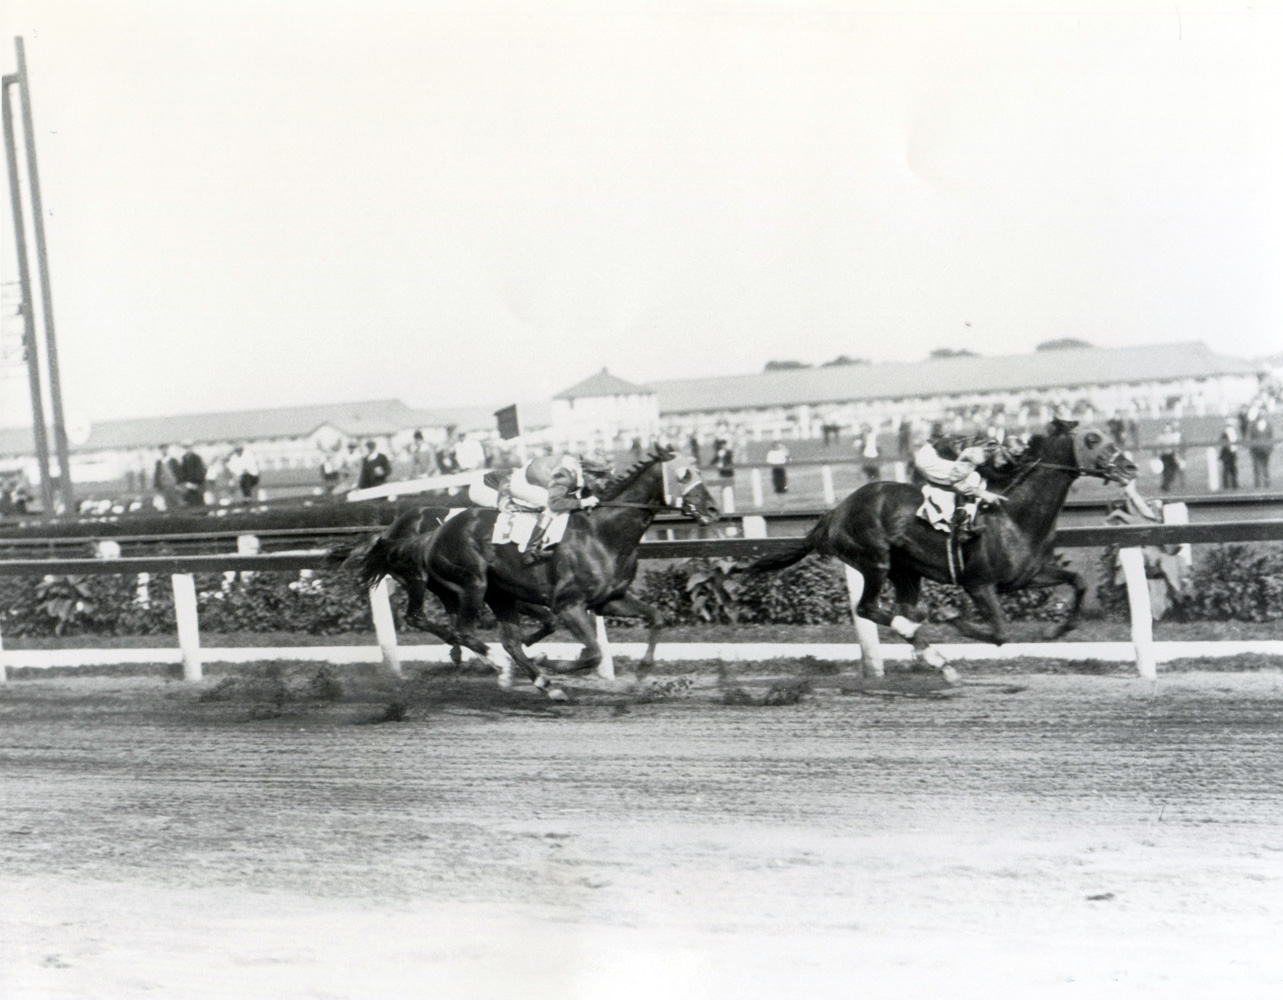 Sun Beau (Frank Coltiletti up) winning the 1929 Aqueduct Handicap at Aqueduct (Keeneland Library Cook Collection/Museum Collection)